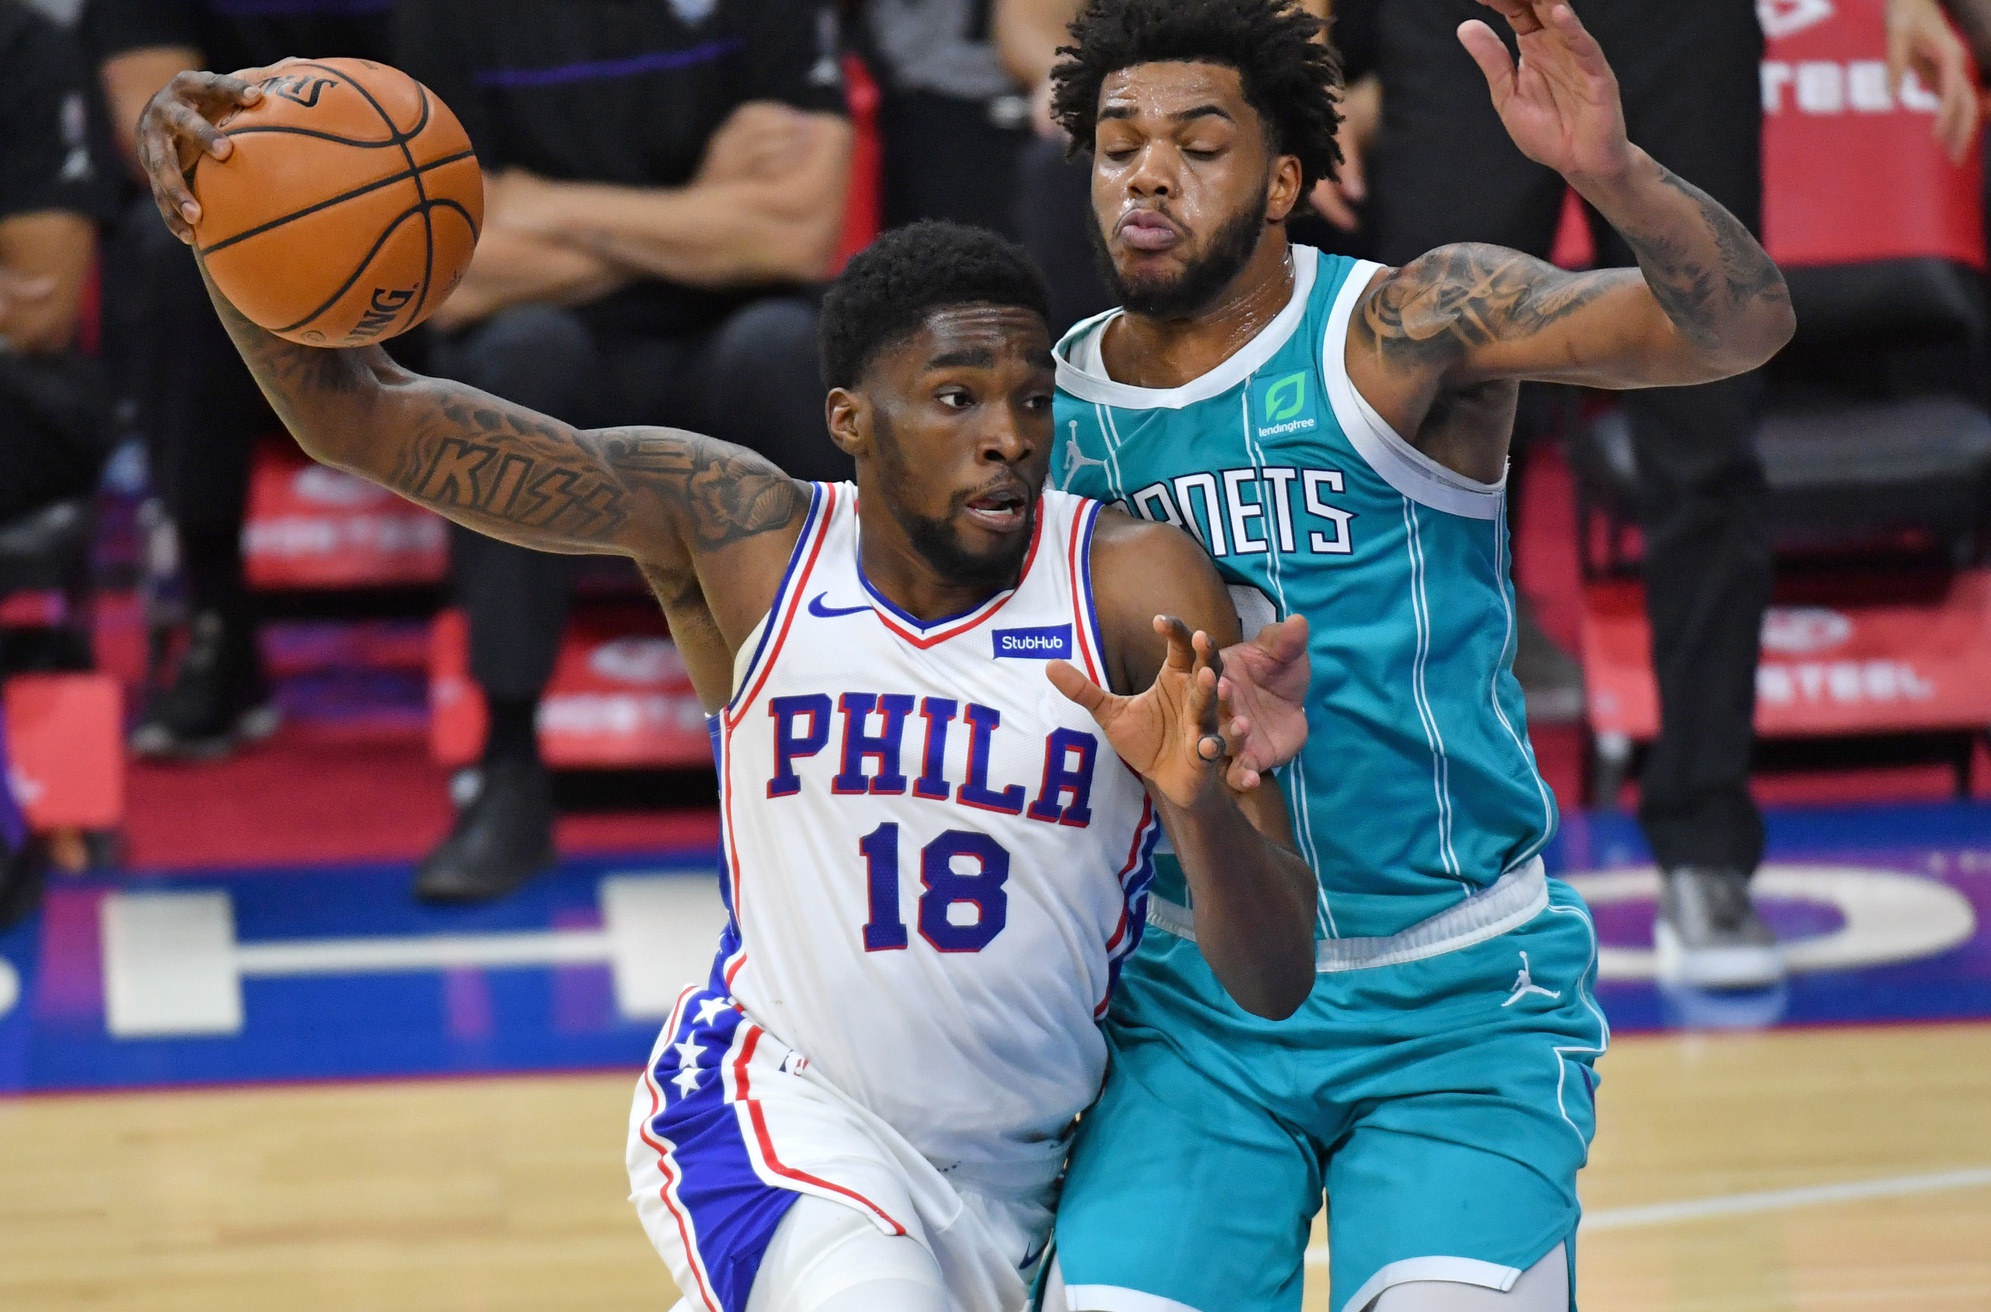 Hornets 76ers will work for bitcoins